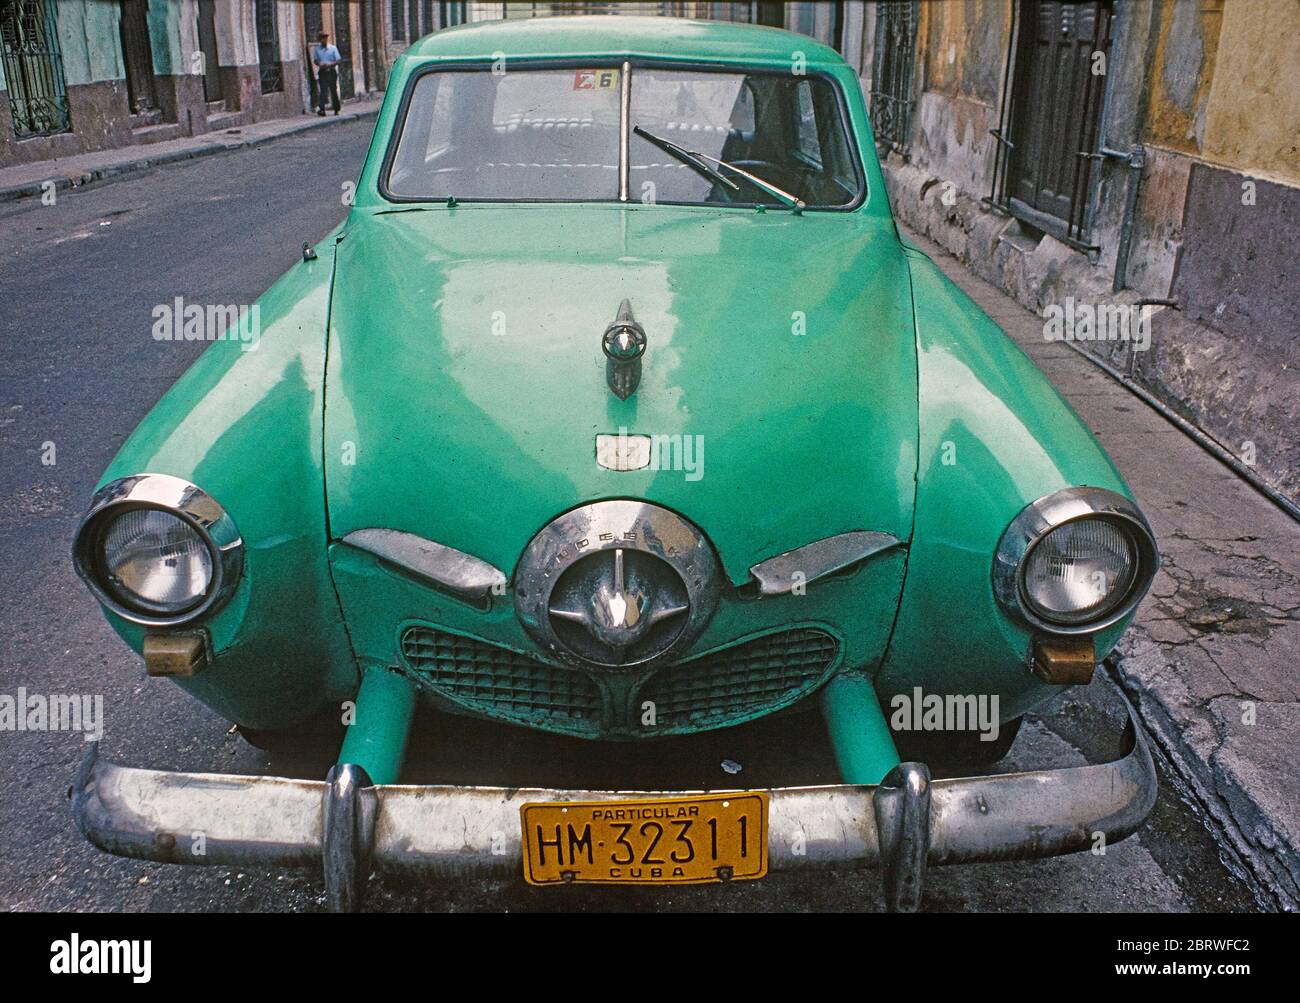 https://c8.alamy.com/comp/2BRWFC2/1950s-classic-studebaker-car-in-original-condition-in-daily-use-street-parked-in-havanna-cuba-2BRWFC2.jpg
